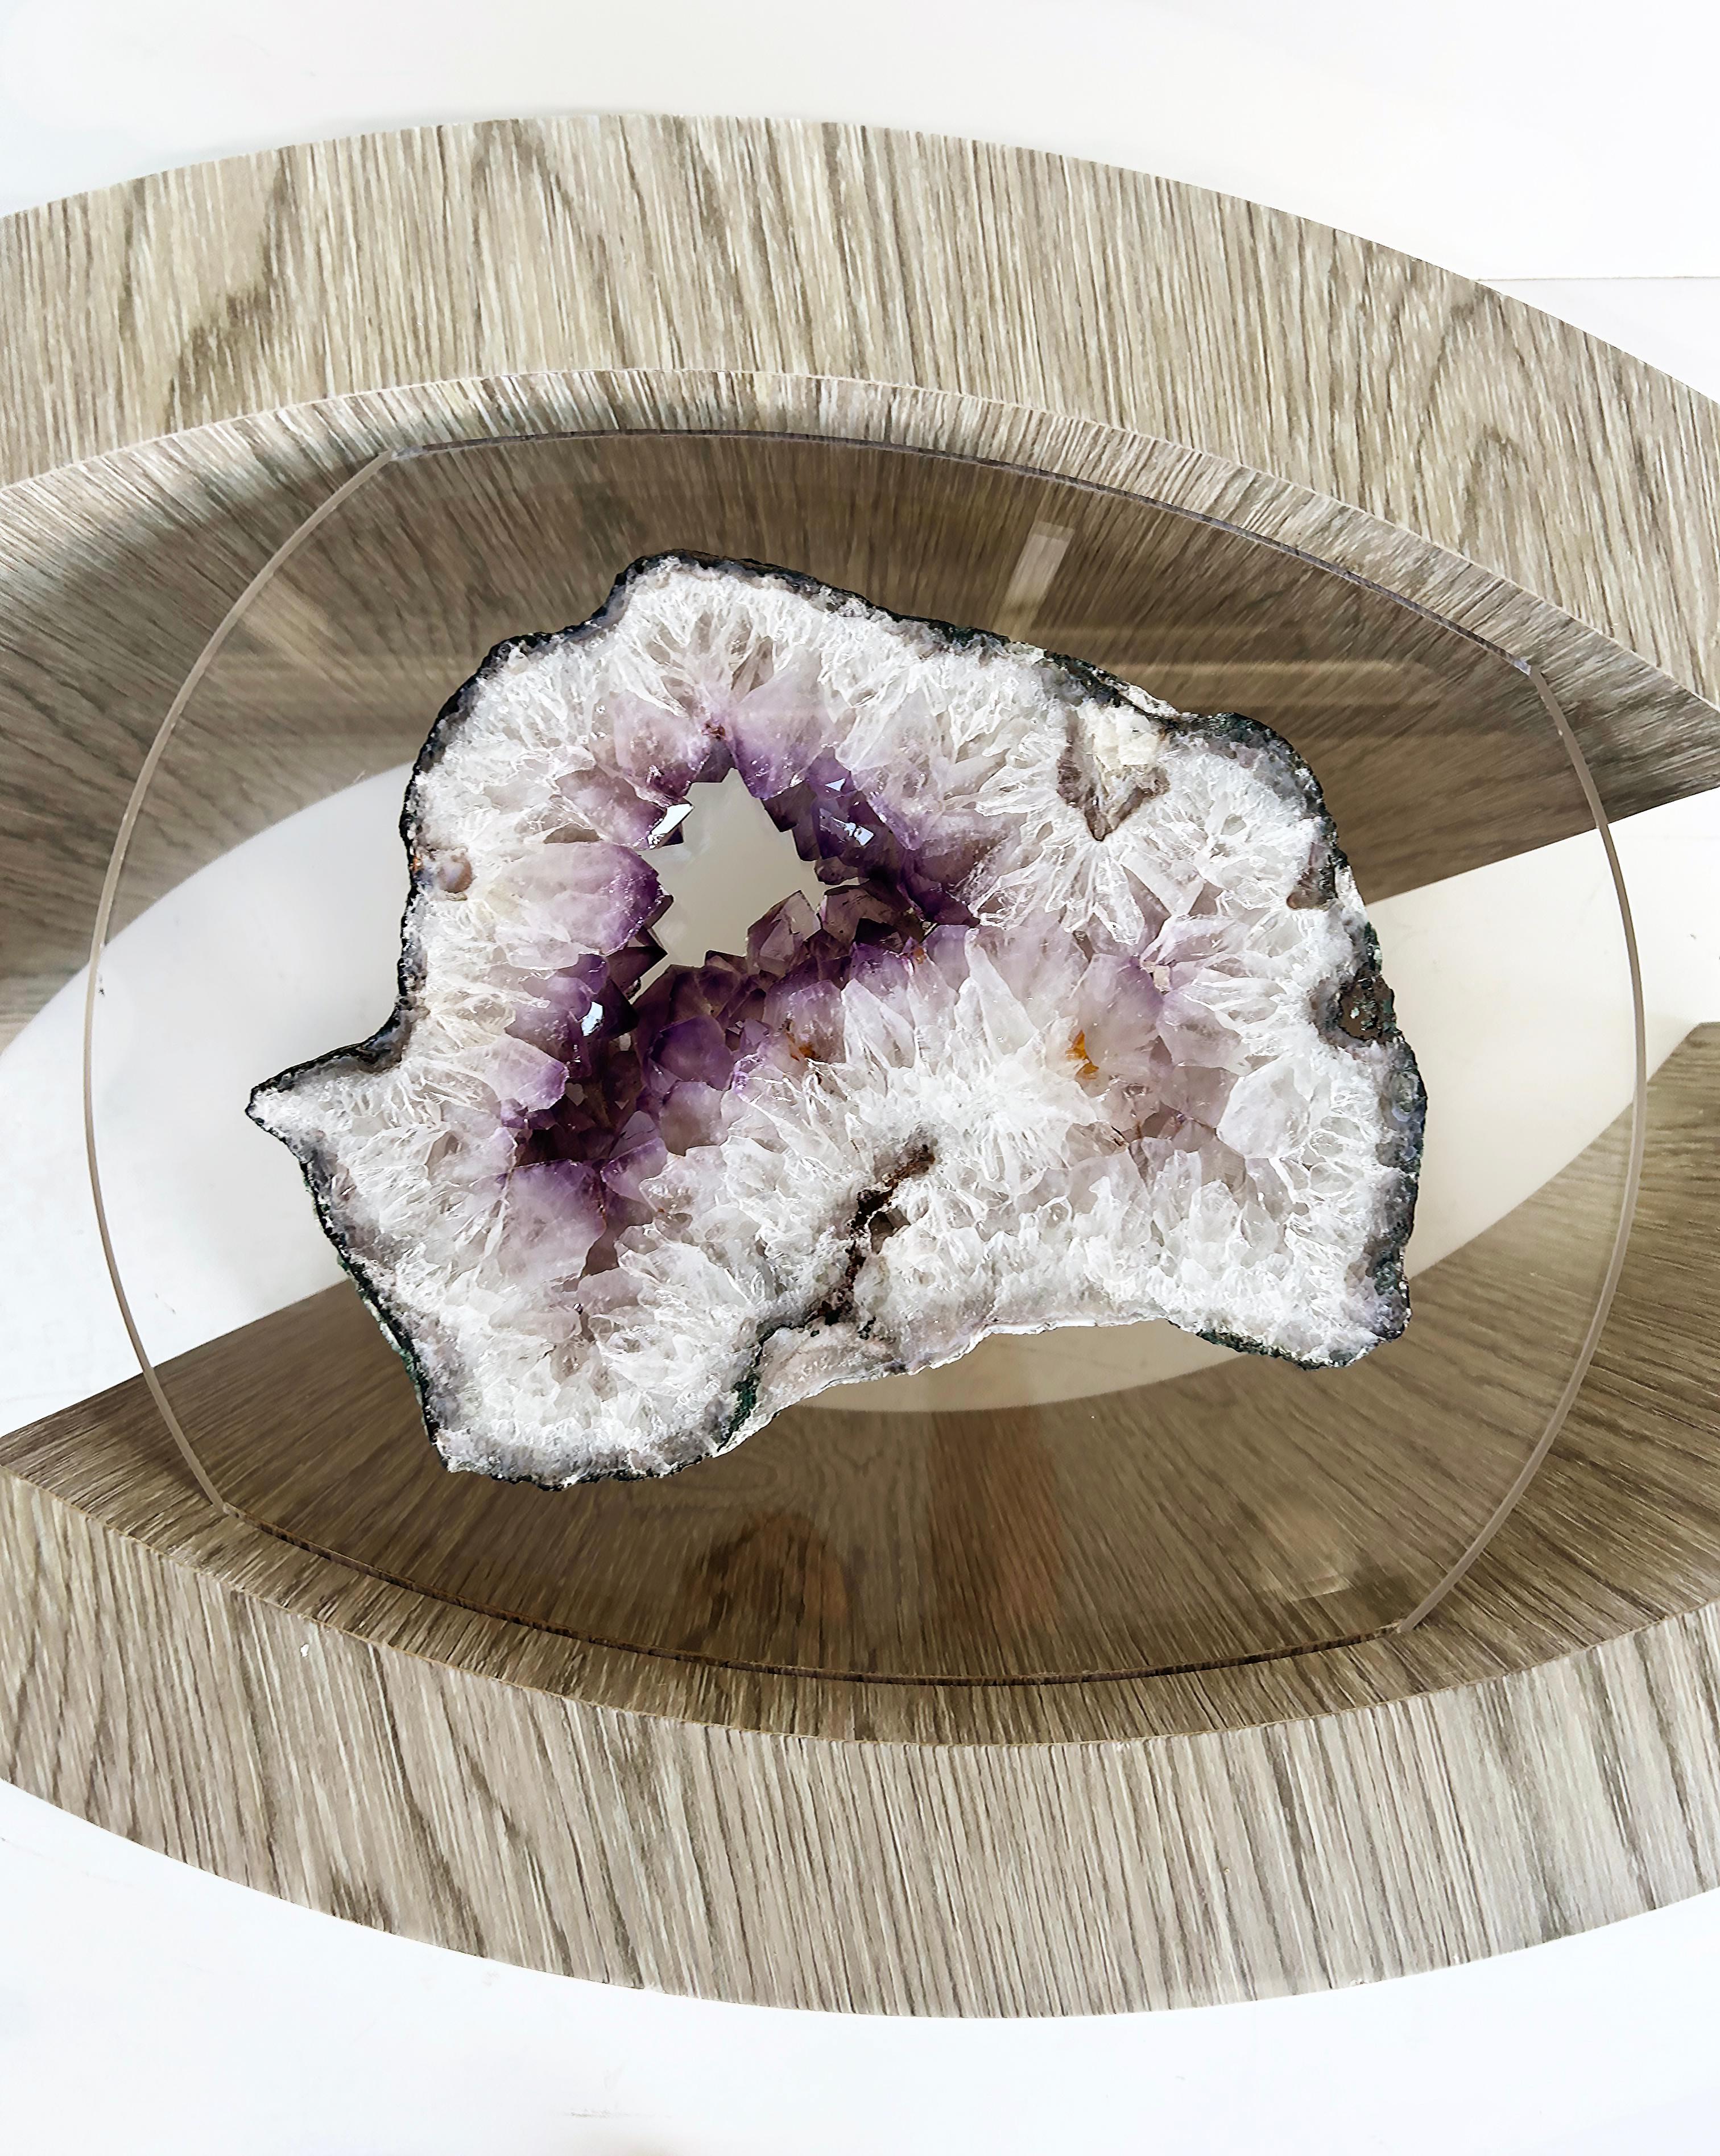 Custom Cocktail Table, Oak Base, Amethyst Ring Crystal Geode Center

Offered for sale is a custom-made coffee table with offset curved oak veneer sides that support a rectangular glass top.  Nested with the curved sides is a floating amethyst ring